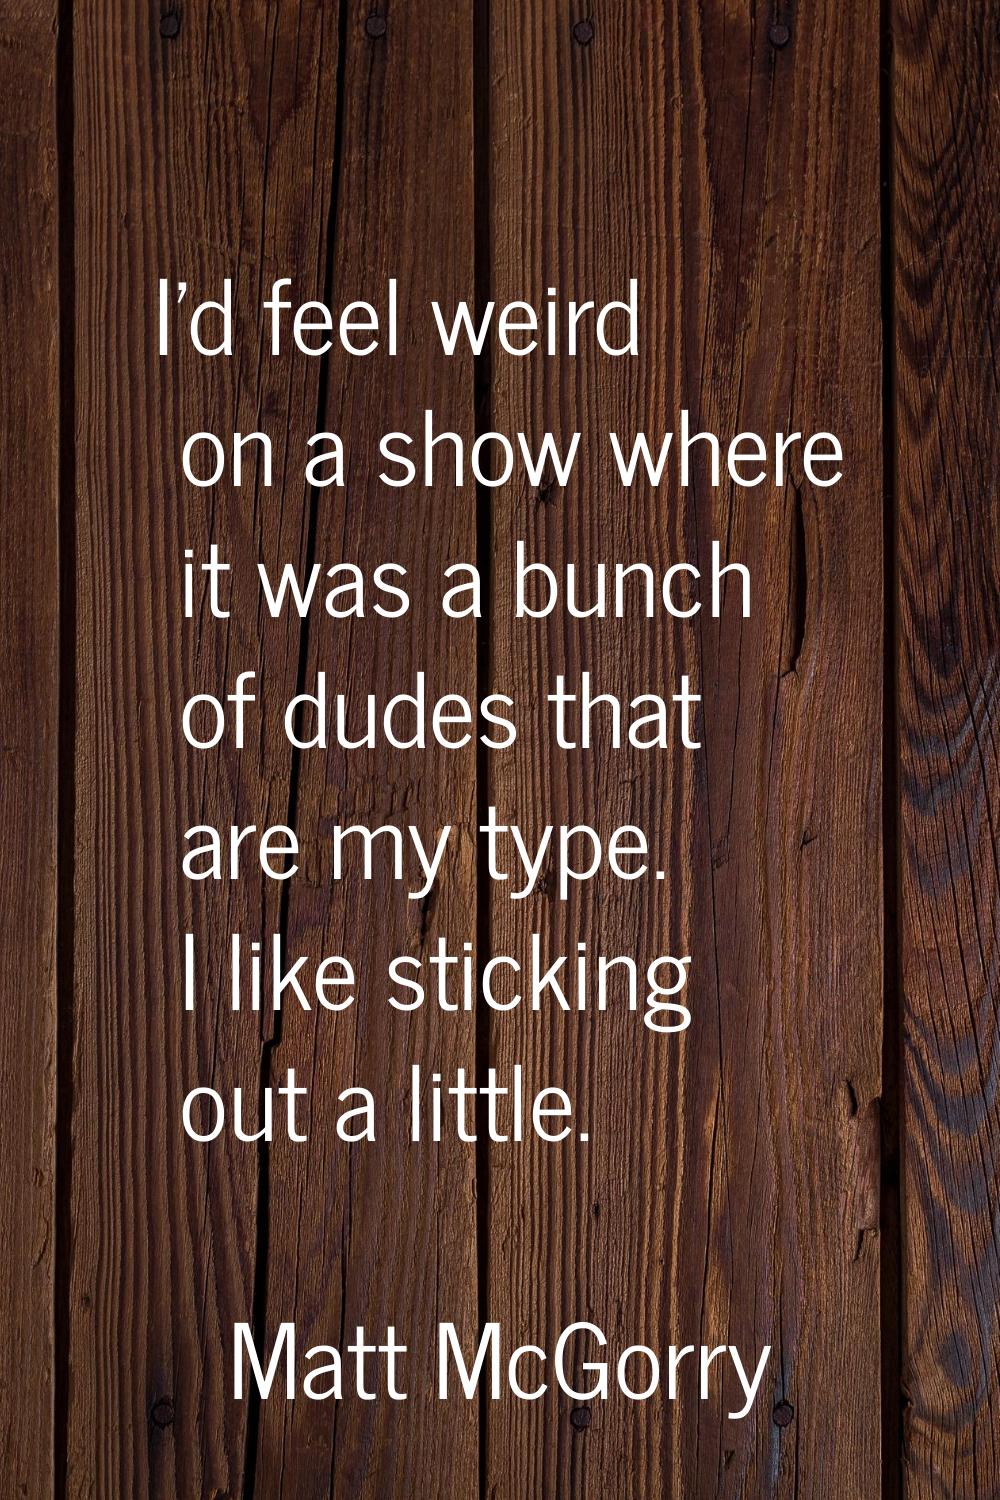 I'd feel weird on a show where it was a bunch of dudes that are my type. I like sticking out a litt